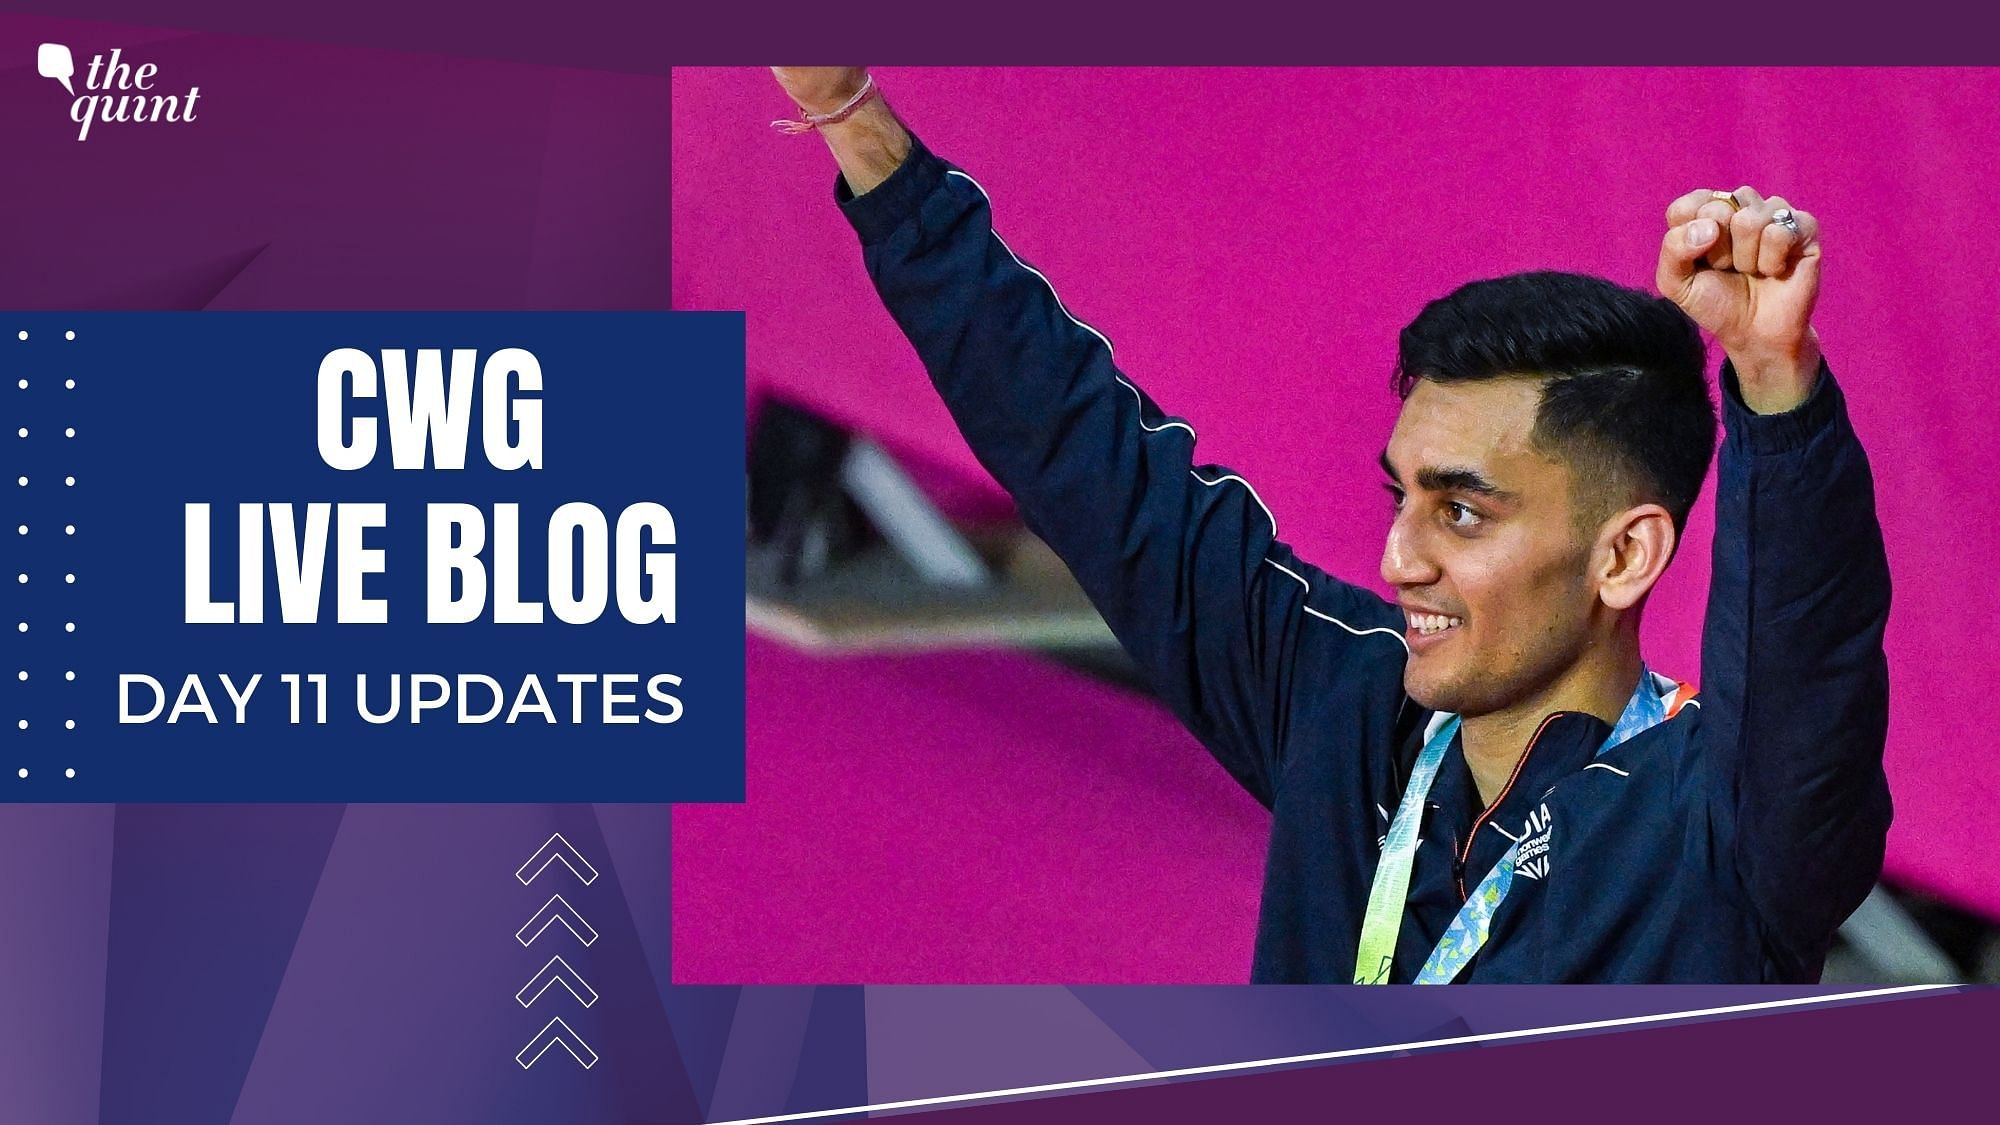 Commonwealth Games 2022 Live, Day 11 Matches Scores and Results Updates Three Gold Medals in Badminton, Sharath Kamal Wins TT Gold, Silver in Mens Hockey